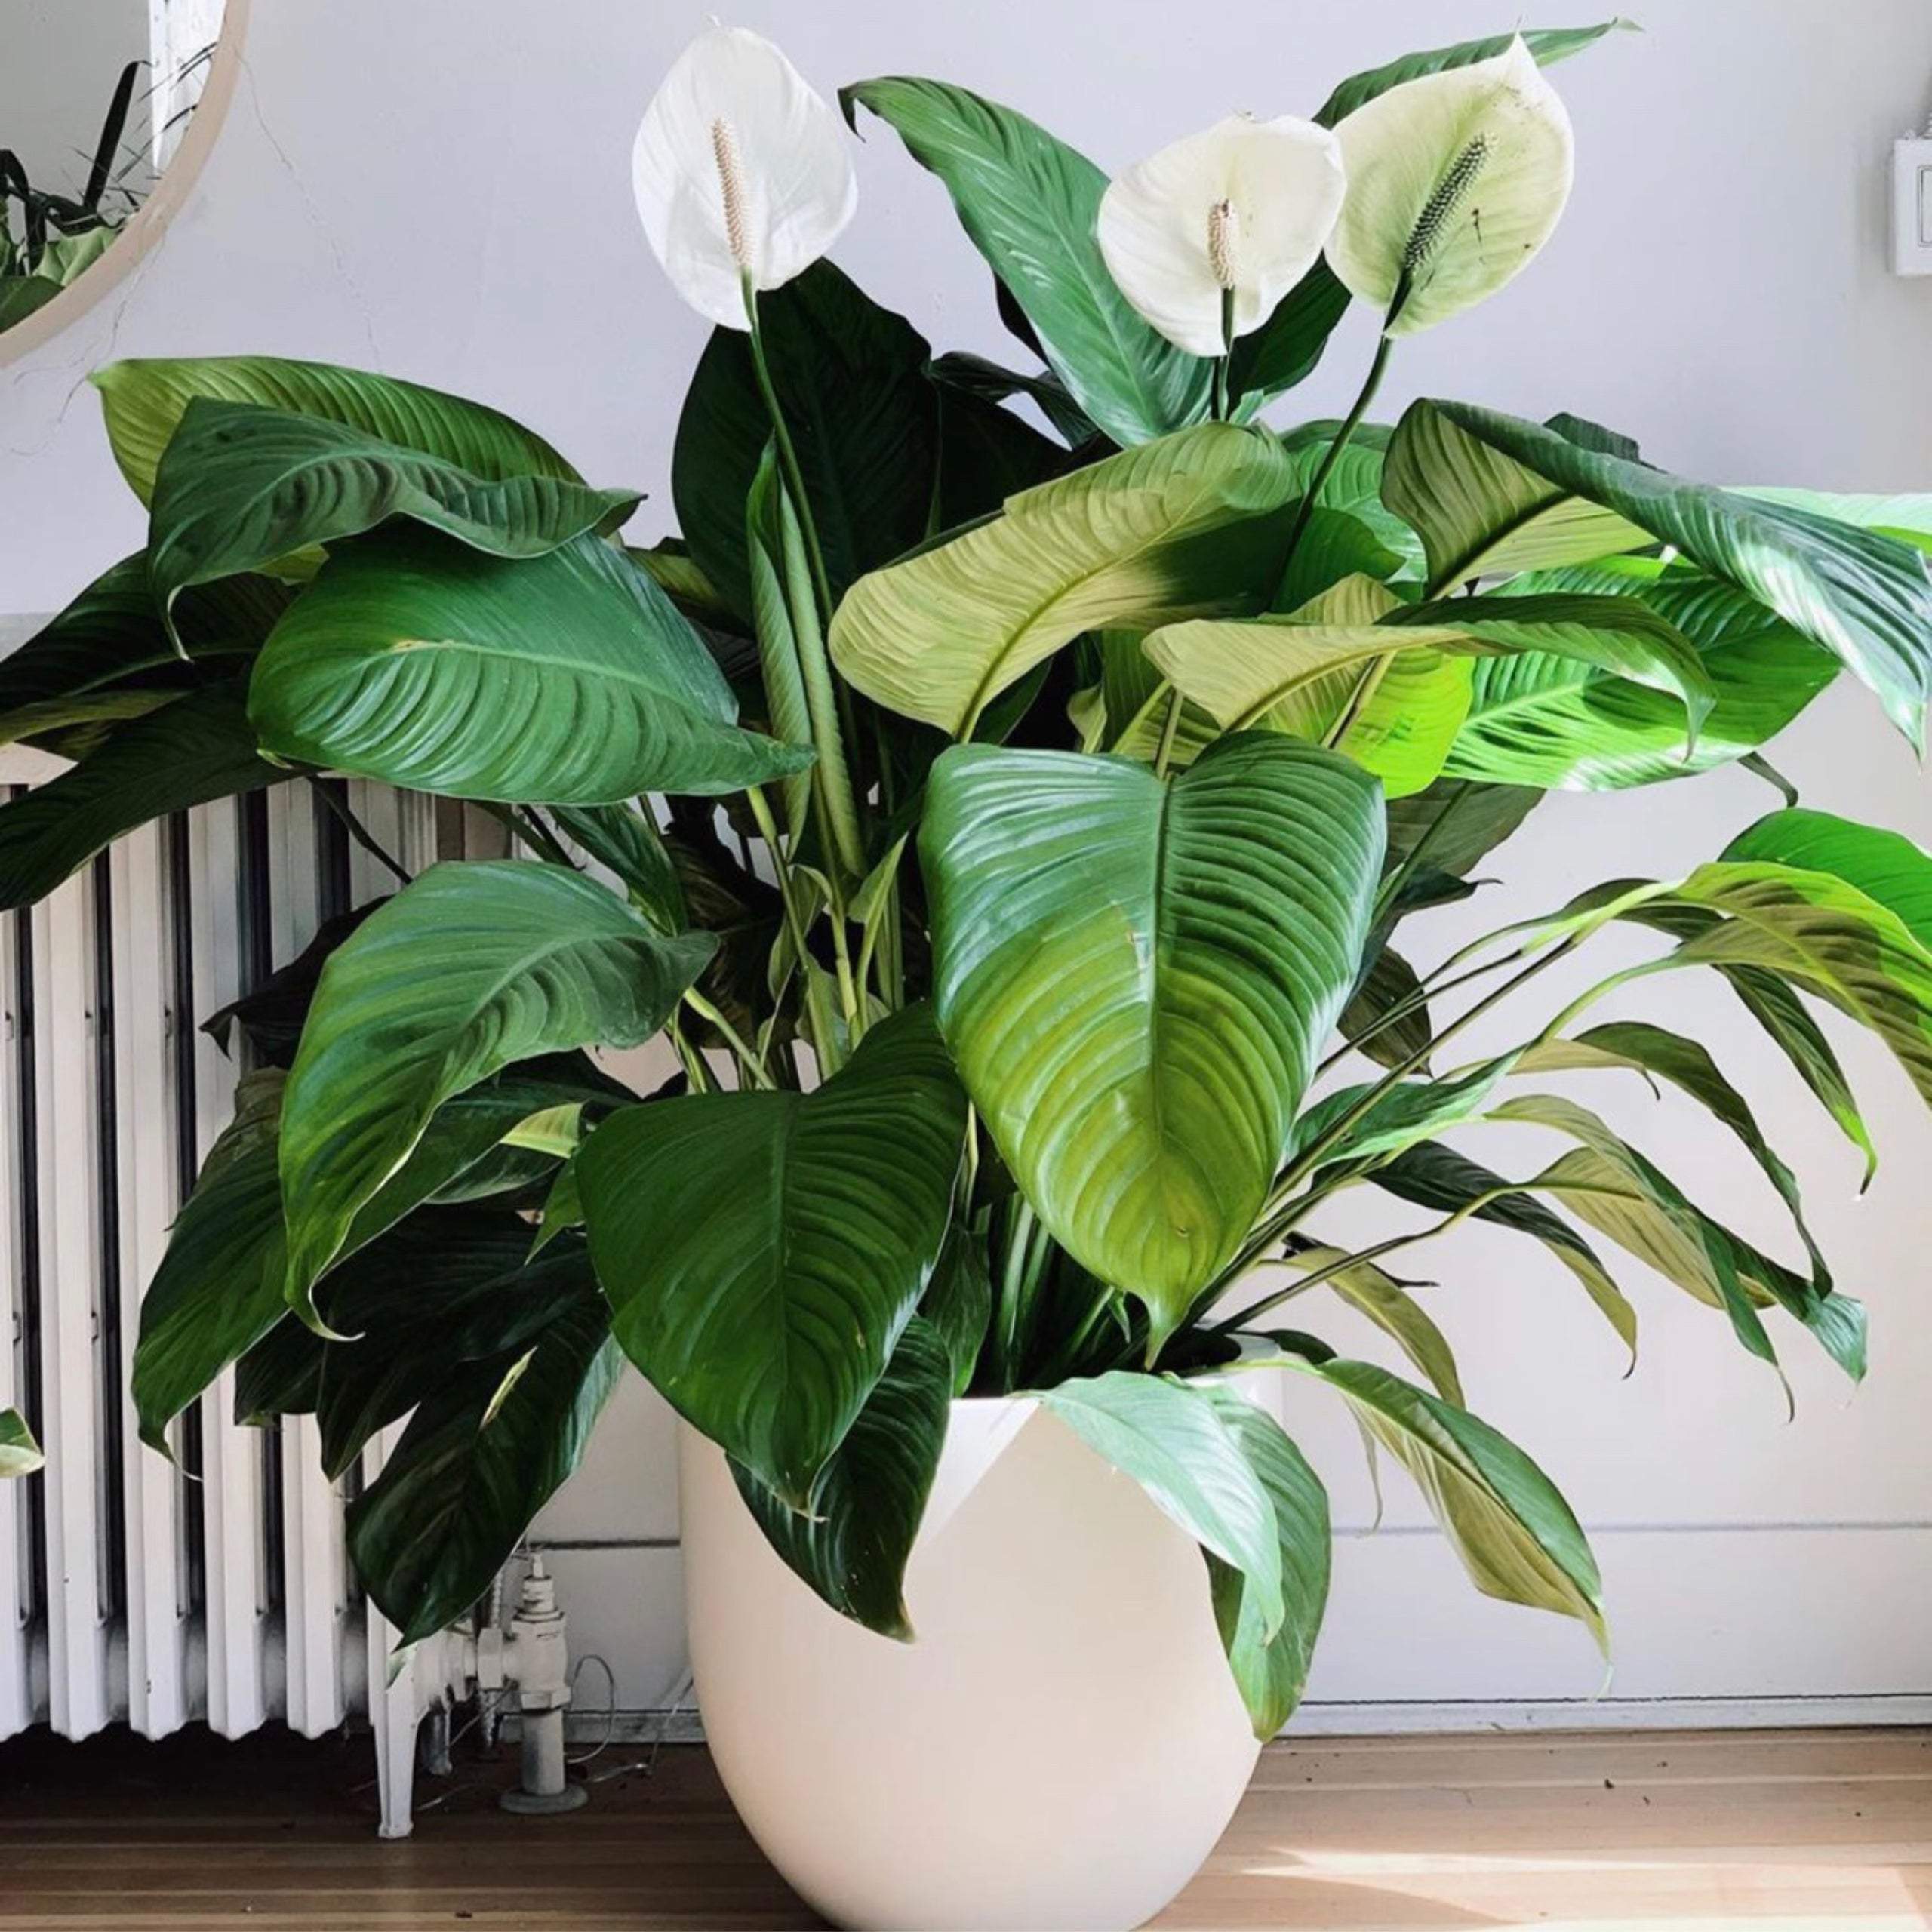 Spathiphyllum “Peace Lily”